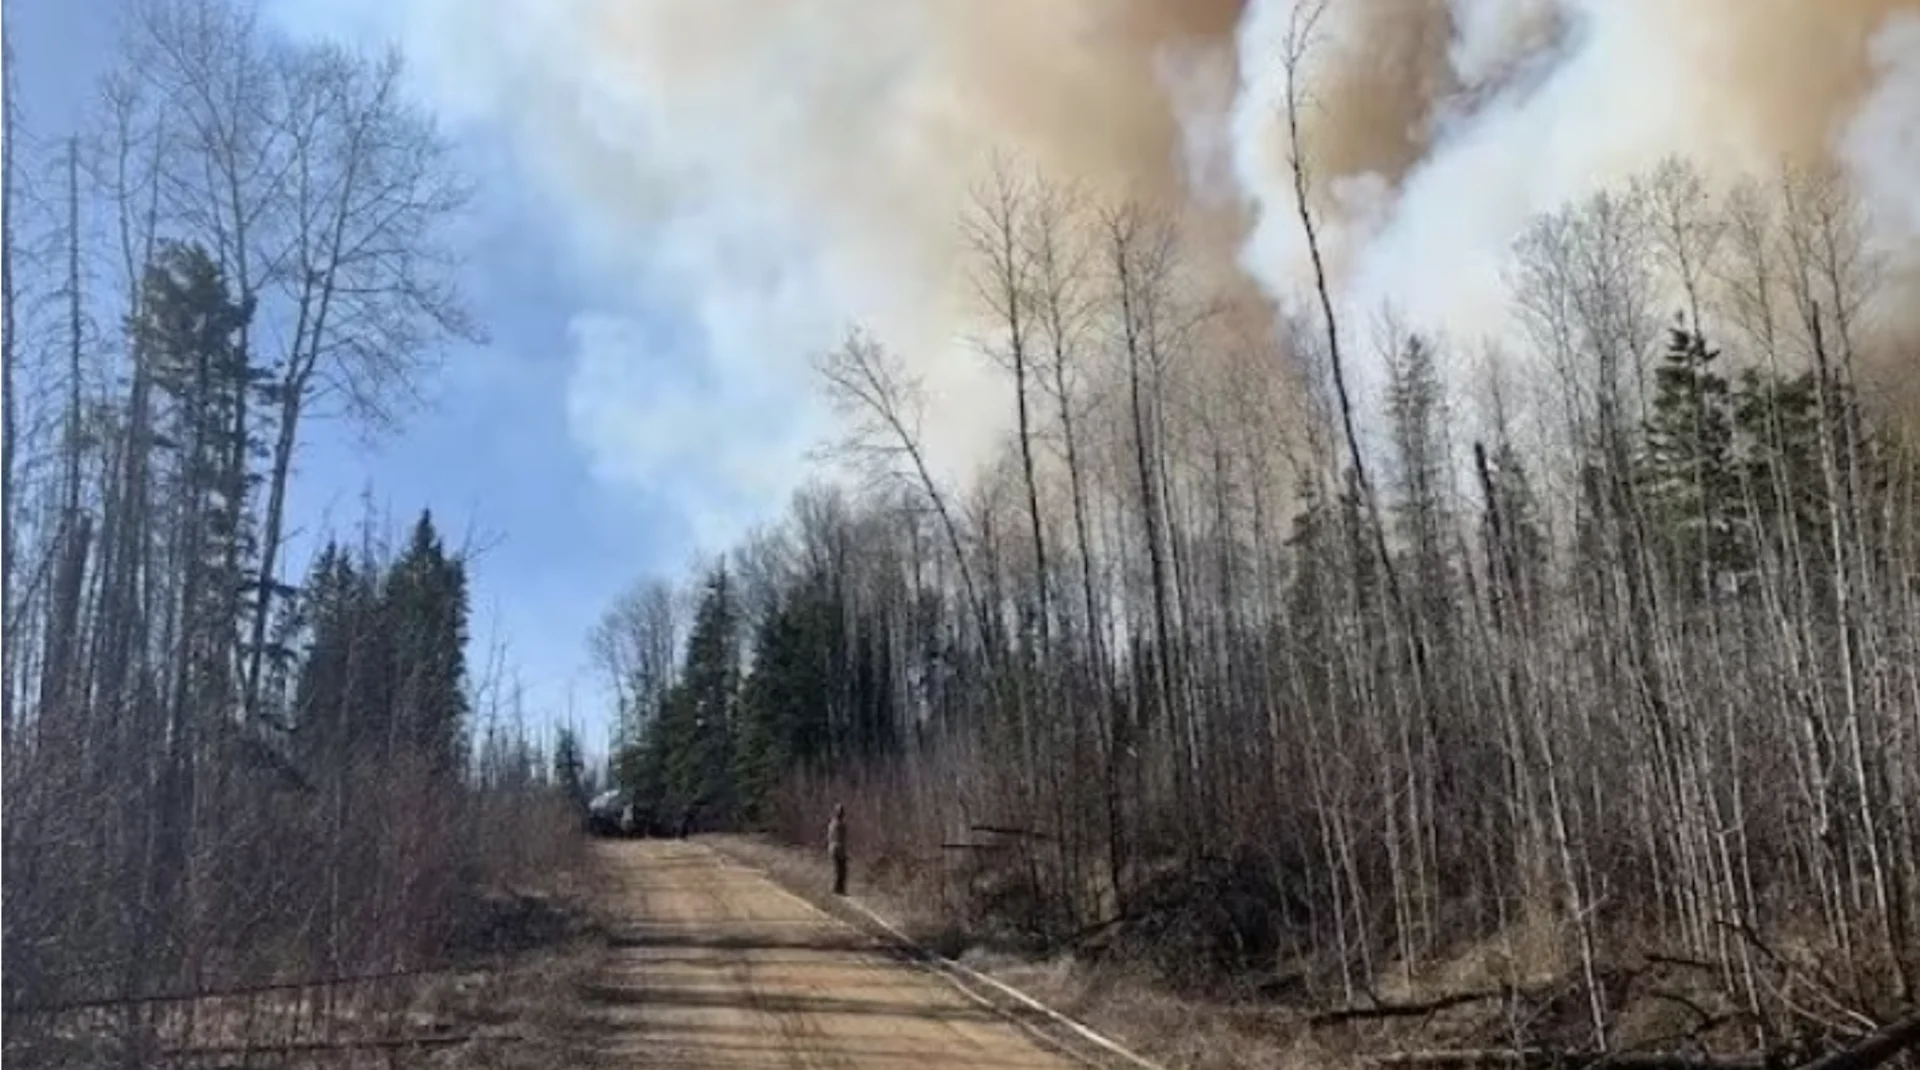 Rocky View County issues fire advisory as wildfires burn across Alberta